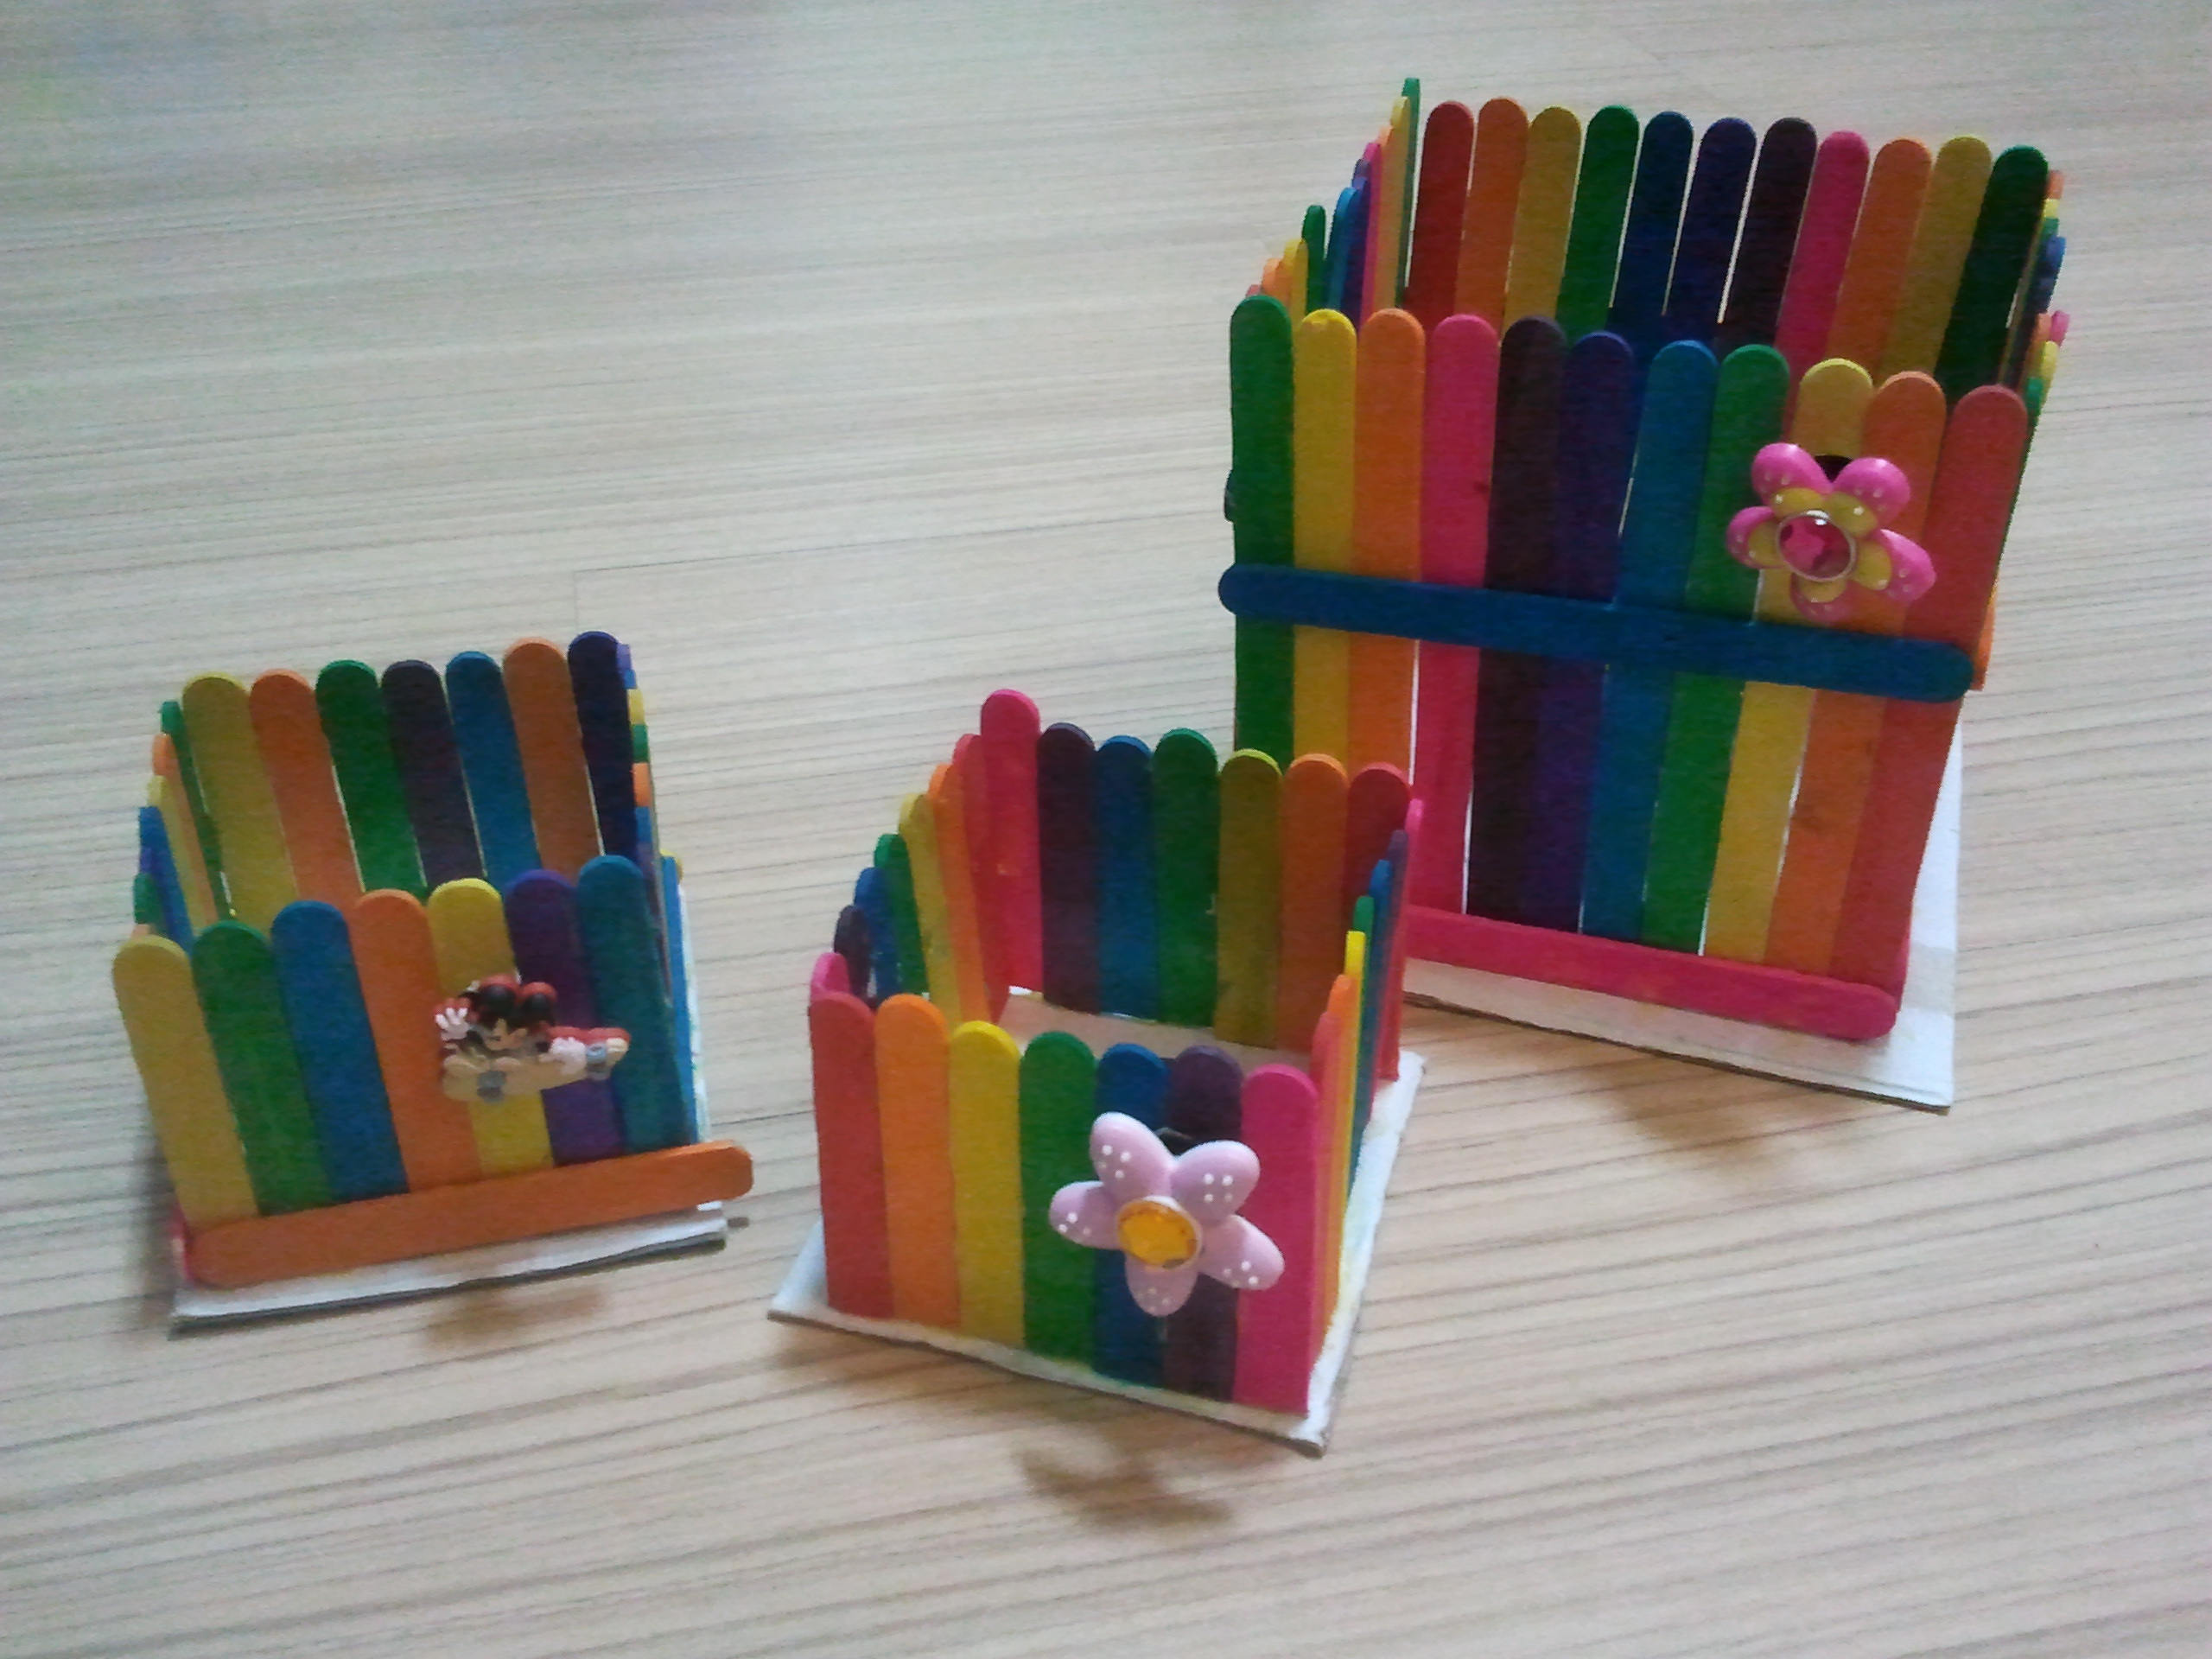 Handicraft photos: 25 Awesome Simple Arts And Crafts For Kids